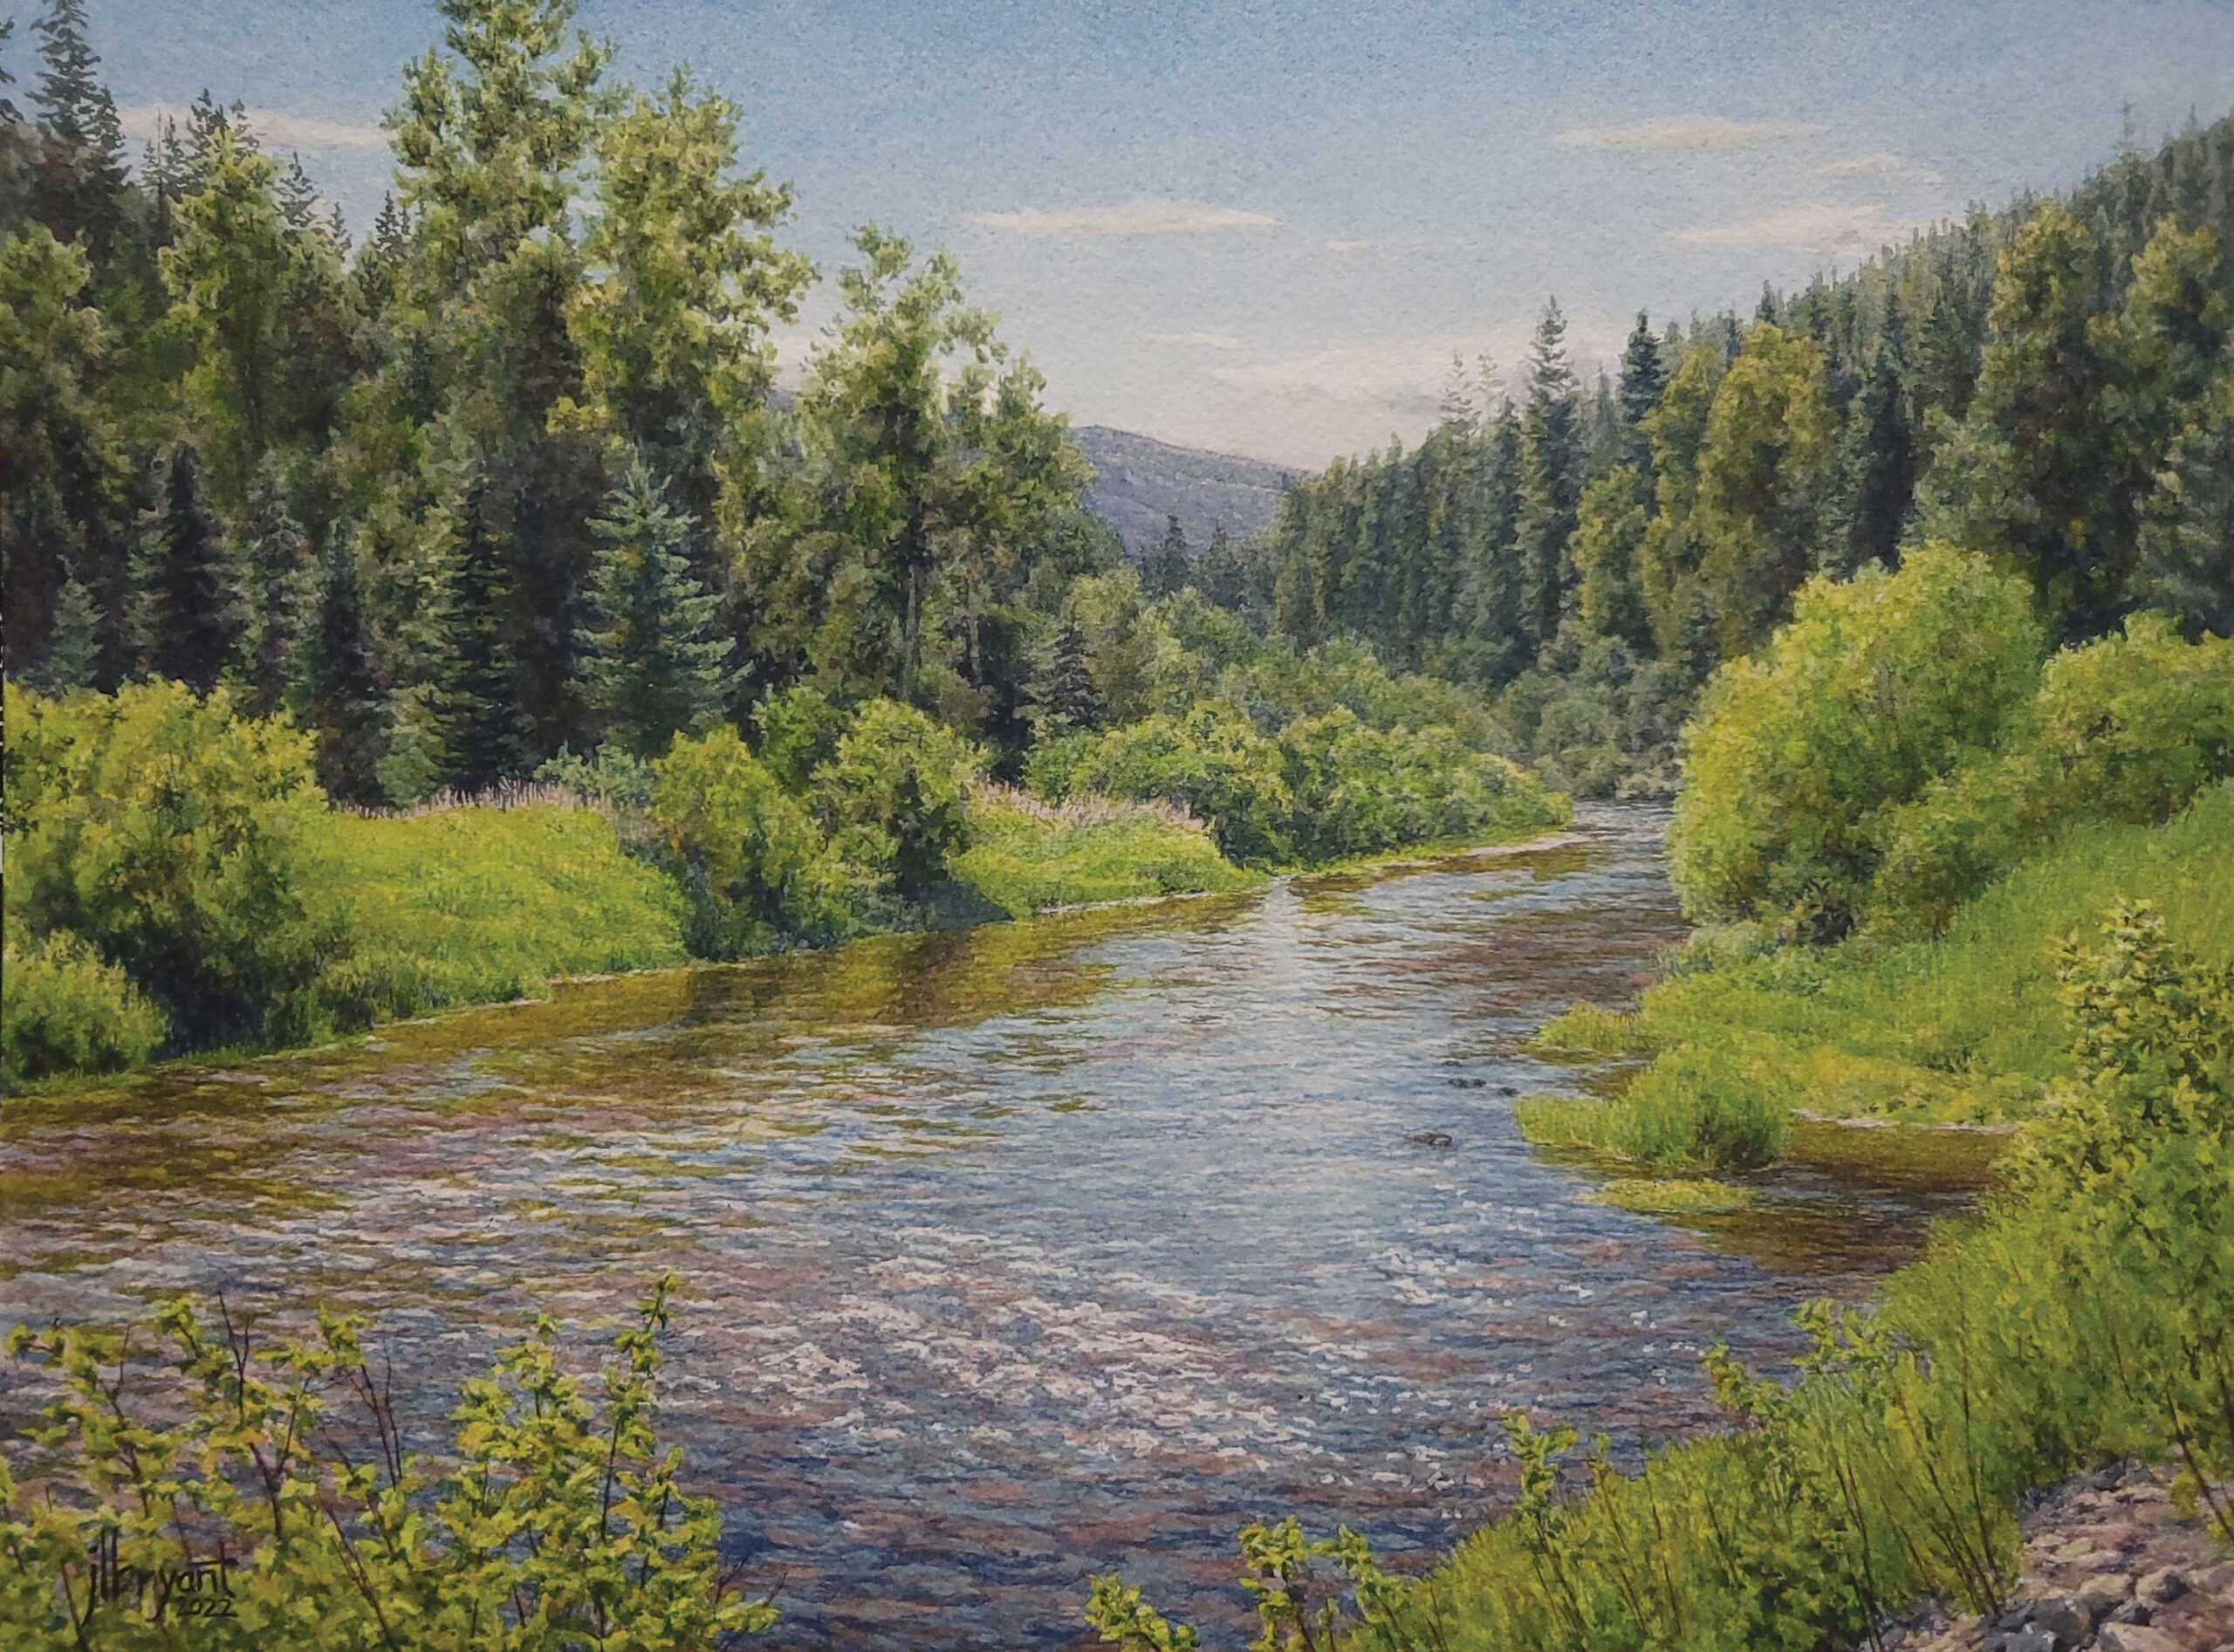 Jessica L. Bryant, "Teepee Creek," 2021, watercolor, 9 x 12 in., Private collection, plein air and studio